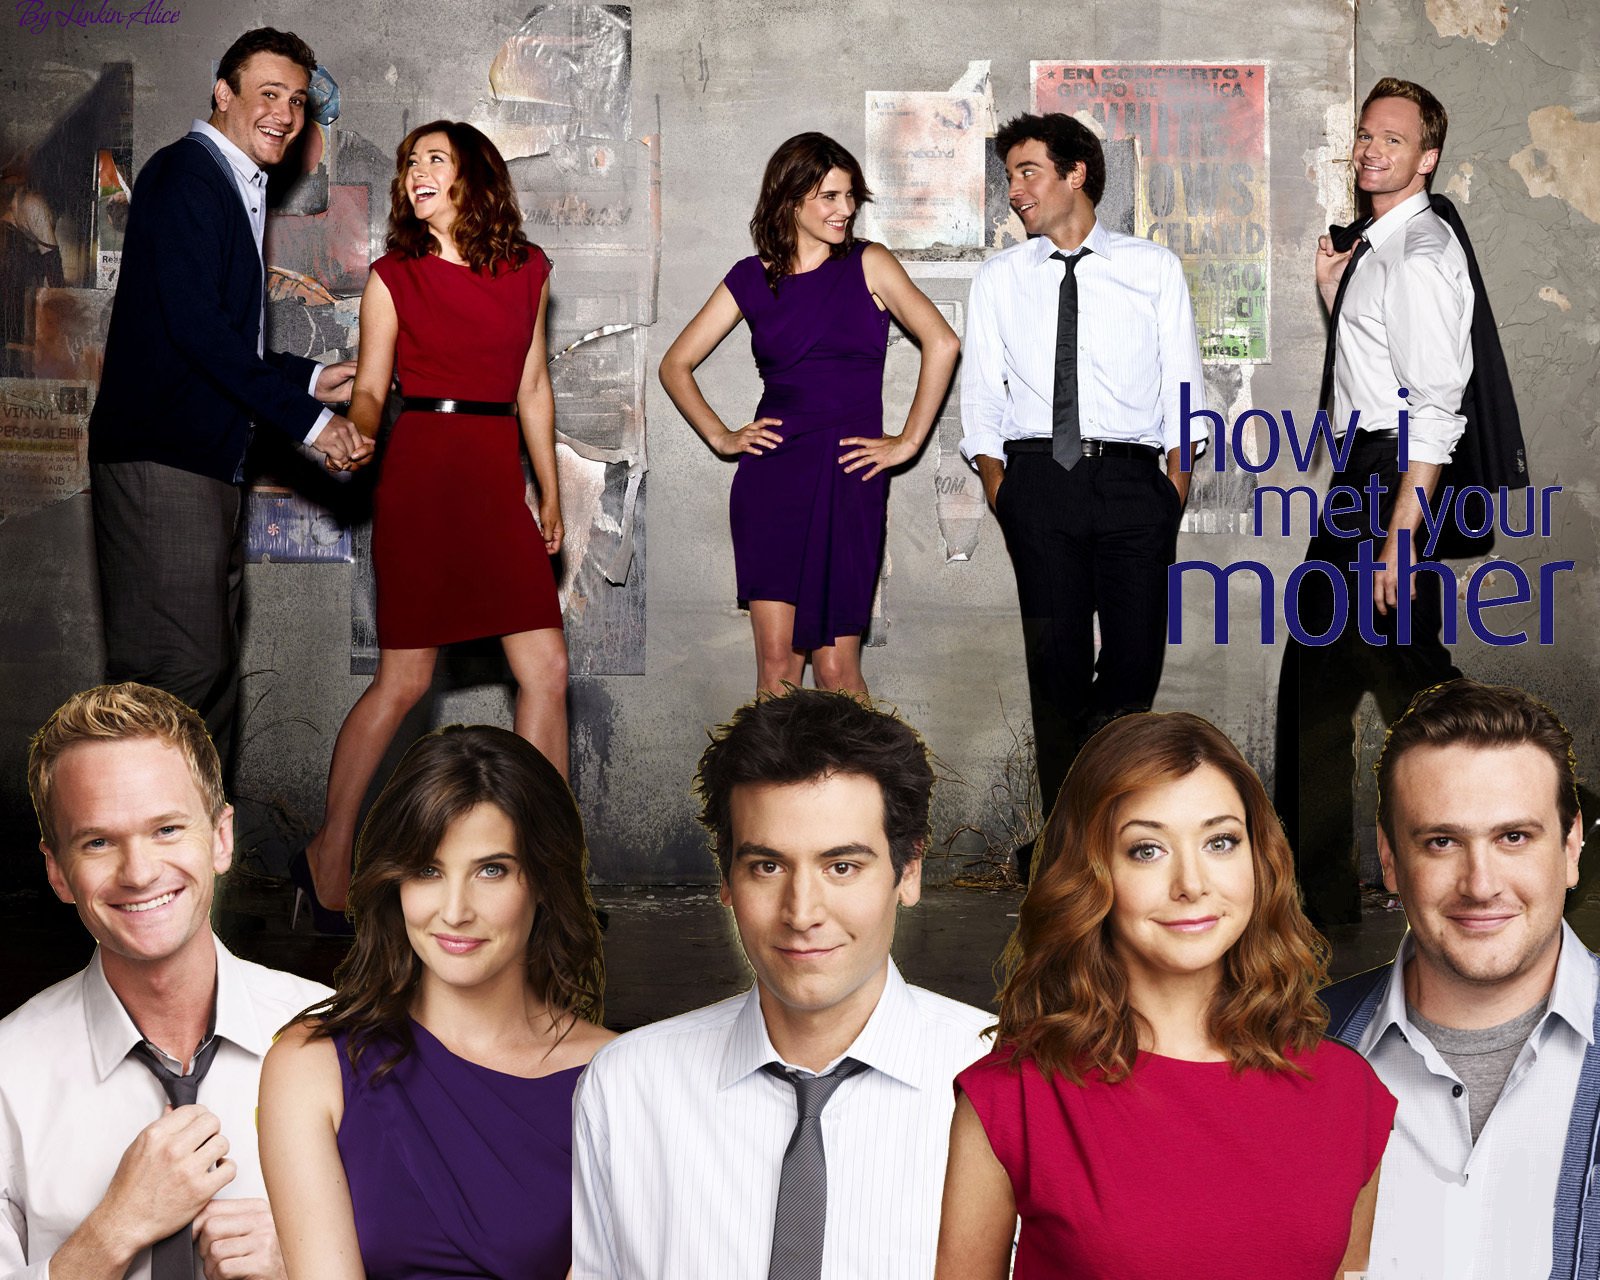 how i met your mother, Comedy, Sitcom, Series, Television, How, Met, Mother,  43 Wallpaper